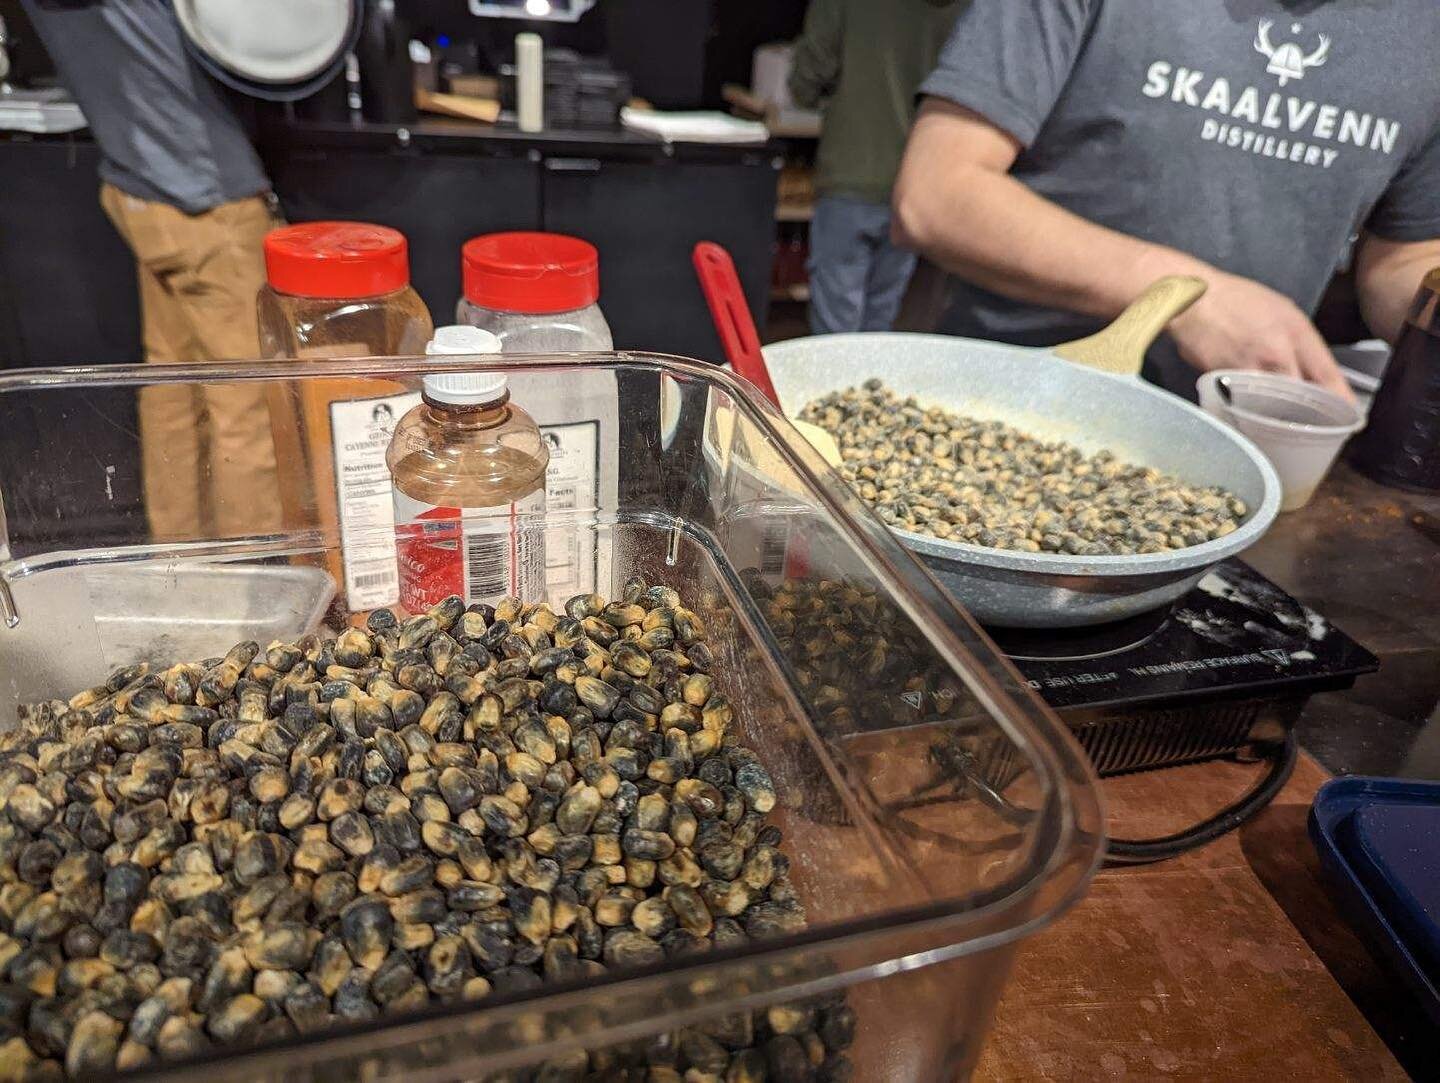 We got to try some fun stuff at Skaalvenn Distillery with our Blue Corn!! We love trying new things with our specialty ingredients, let us know if you&rsquo;re interested in doing something a little different 🤓

#maltwerks #craftmalt #craftbeer #dri